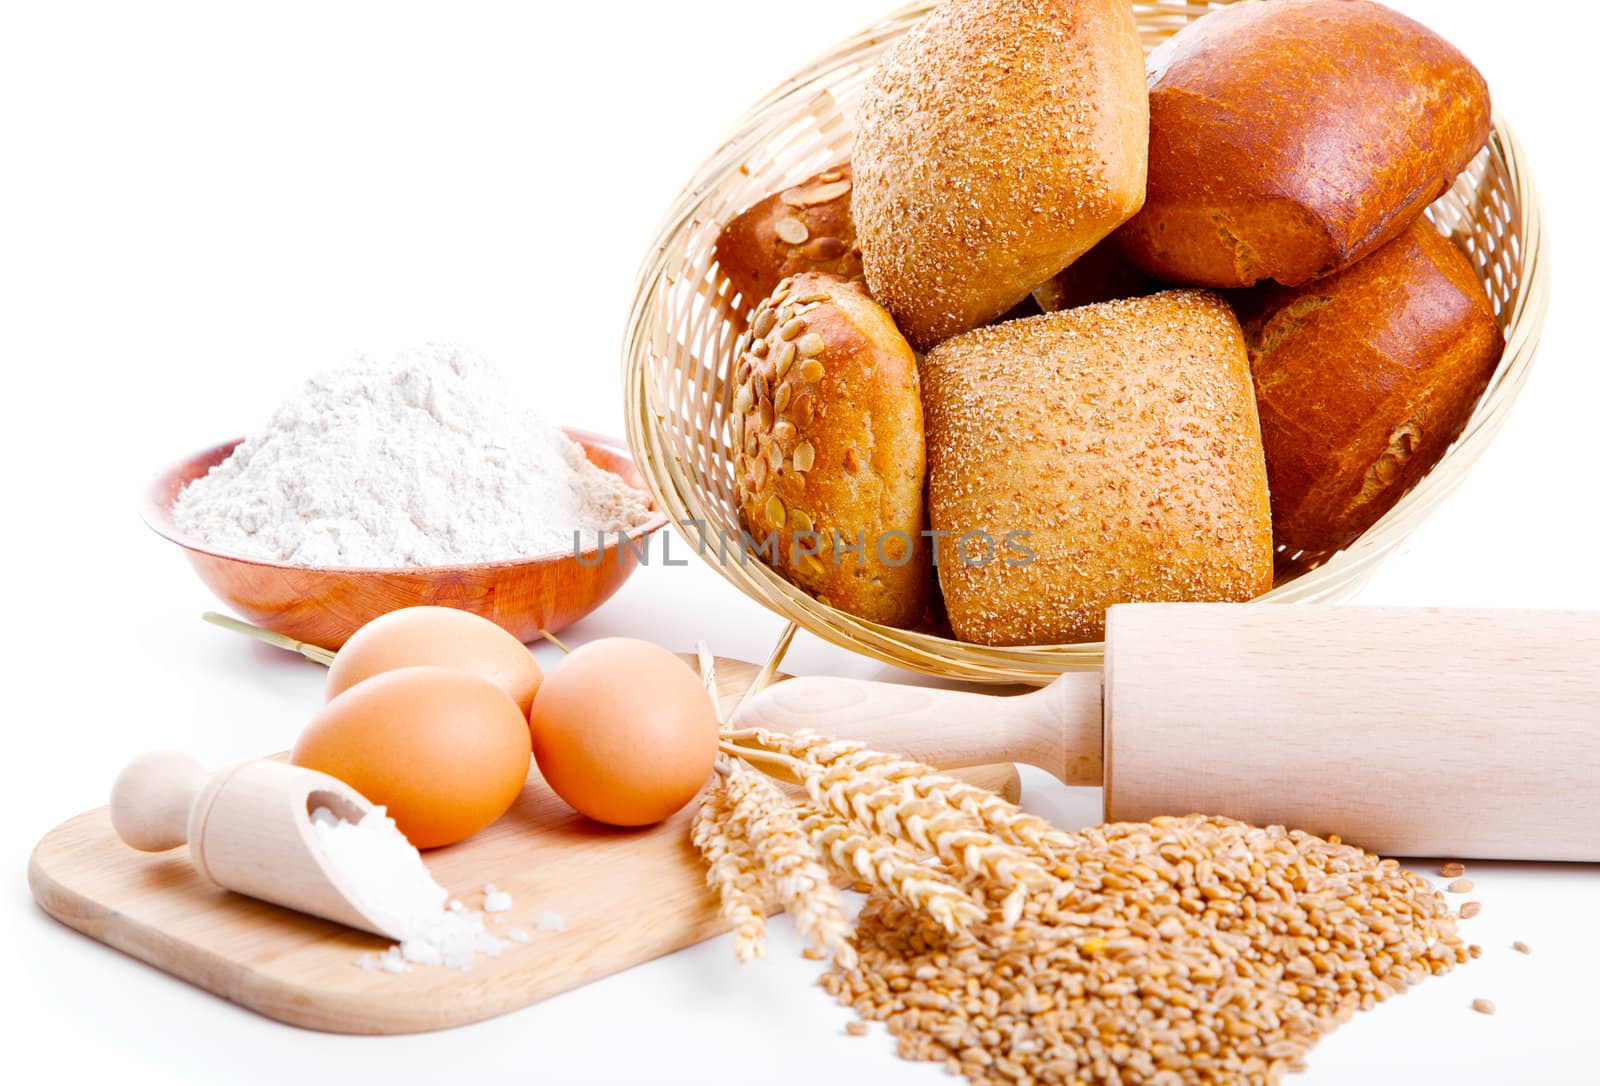 ingredients for homemade bread,  isolated on a white background 